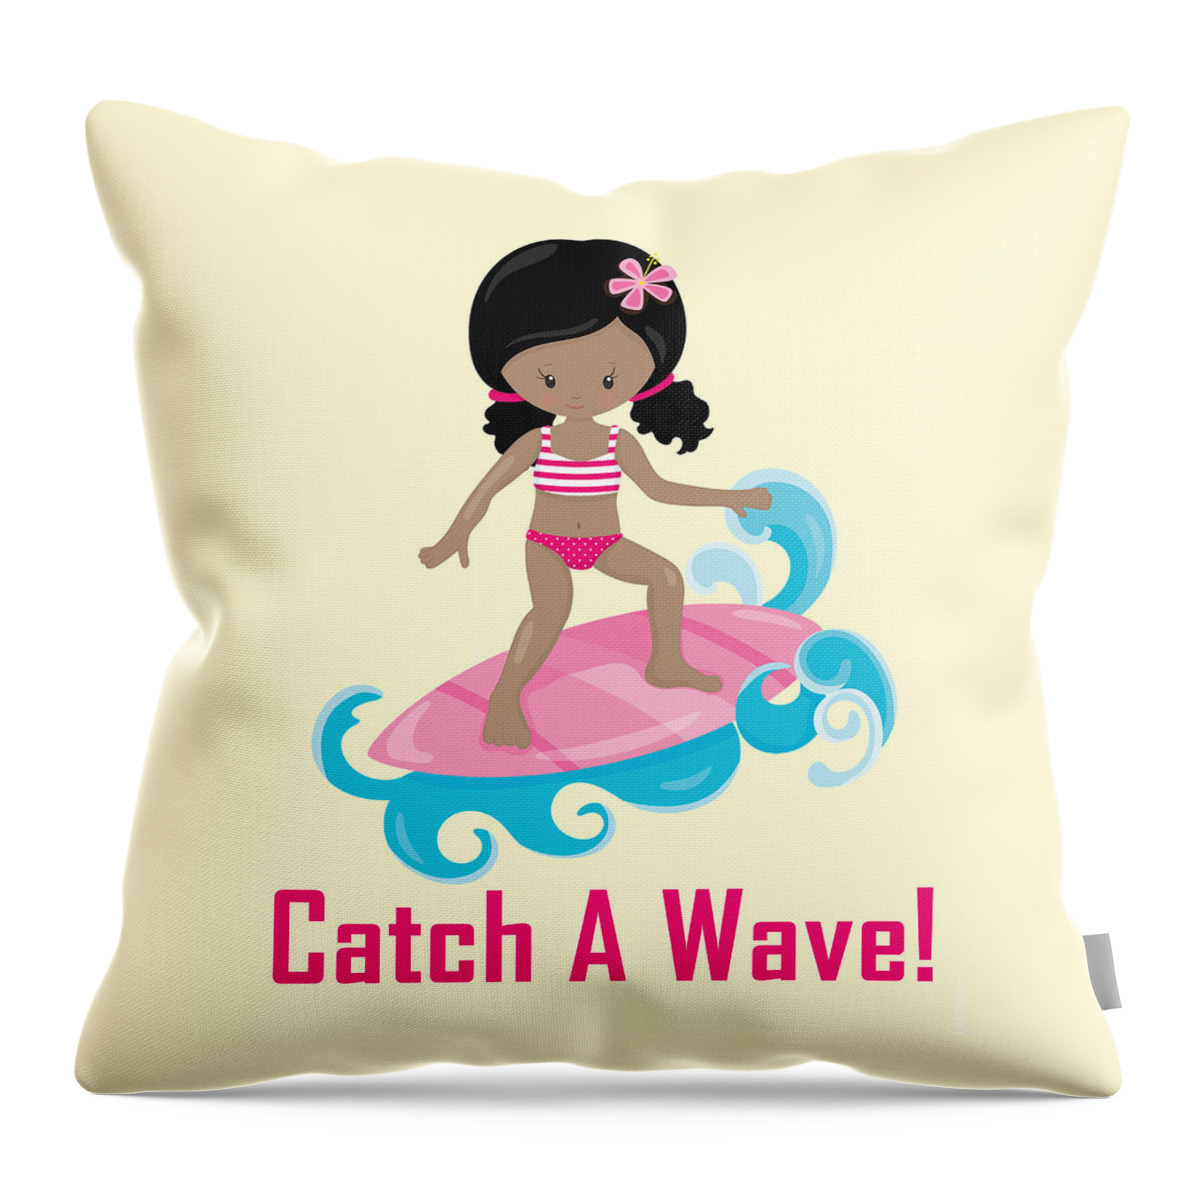 Surfer Art Throw Pillow featuring the digital art Surfer Art Catch A Wave Girl With Surfboard #20 by KayeCee Spain